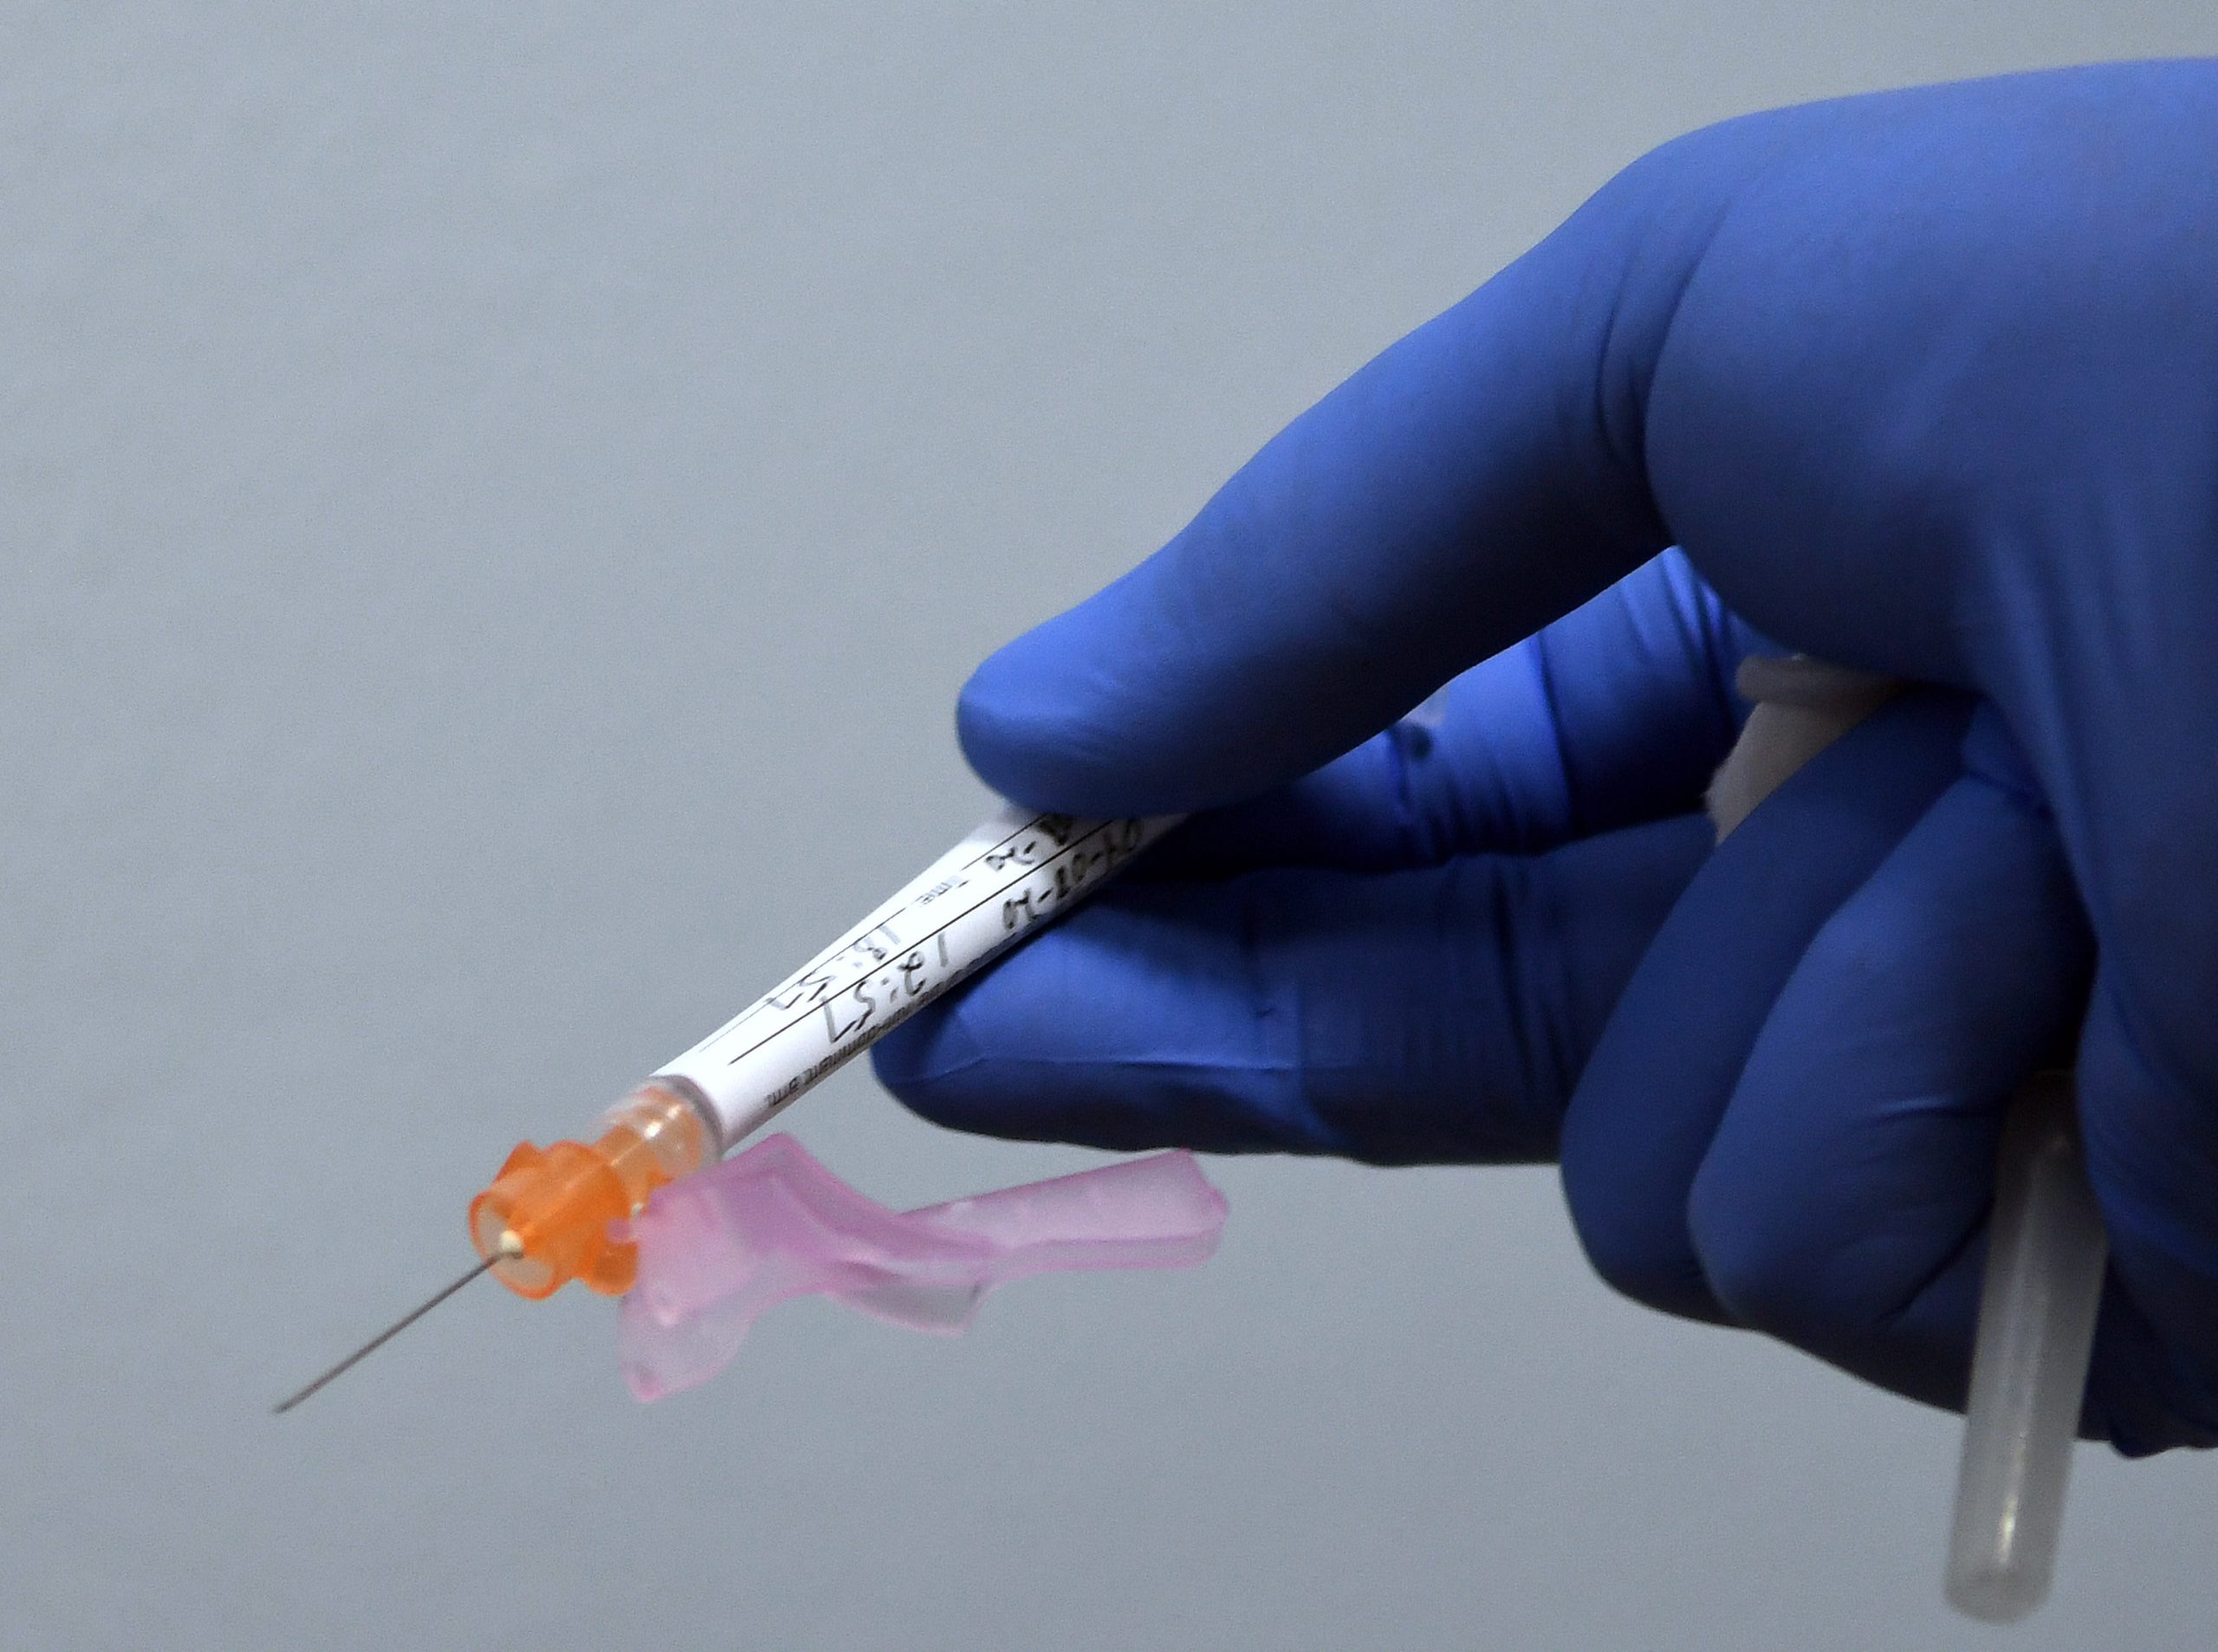 Europe, North America have ‘actually clear’ want for Covid vaccine: Knowledgeable